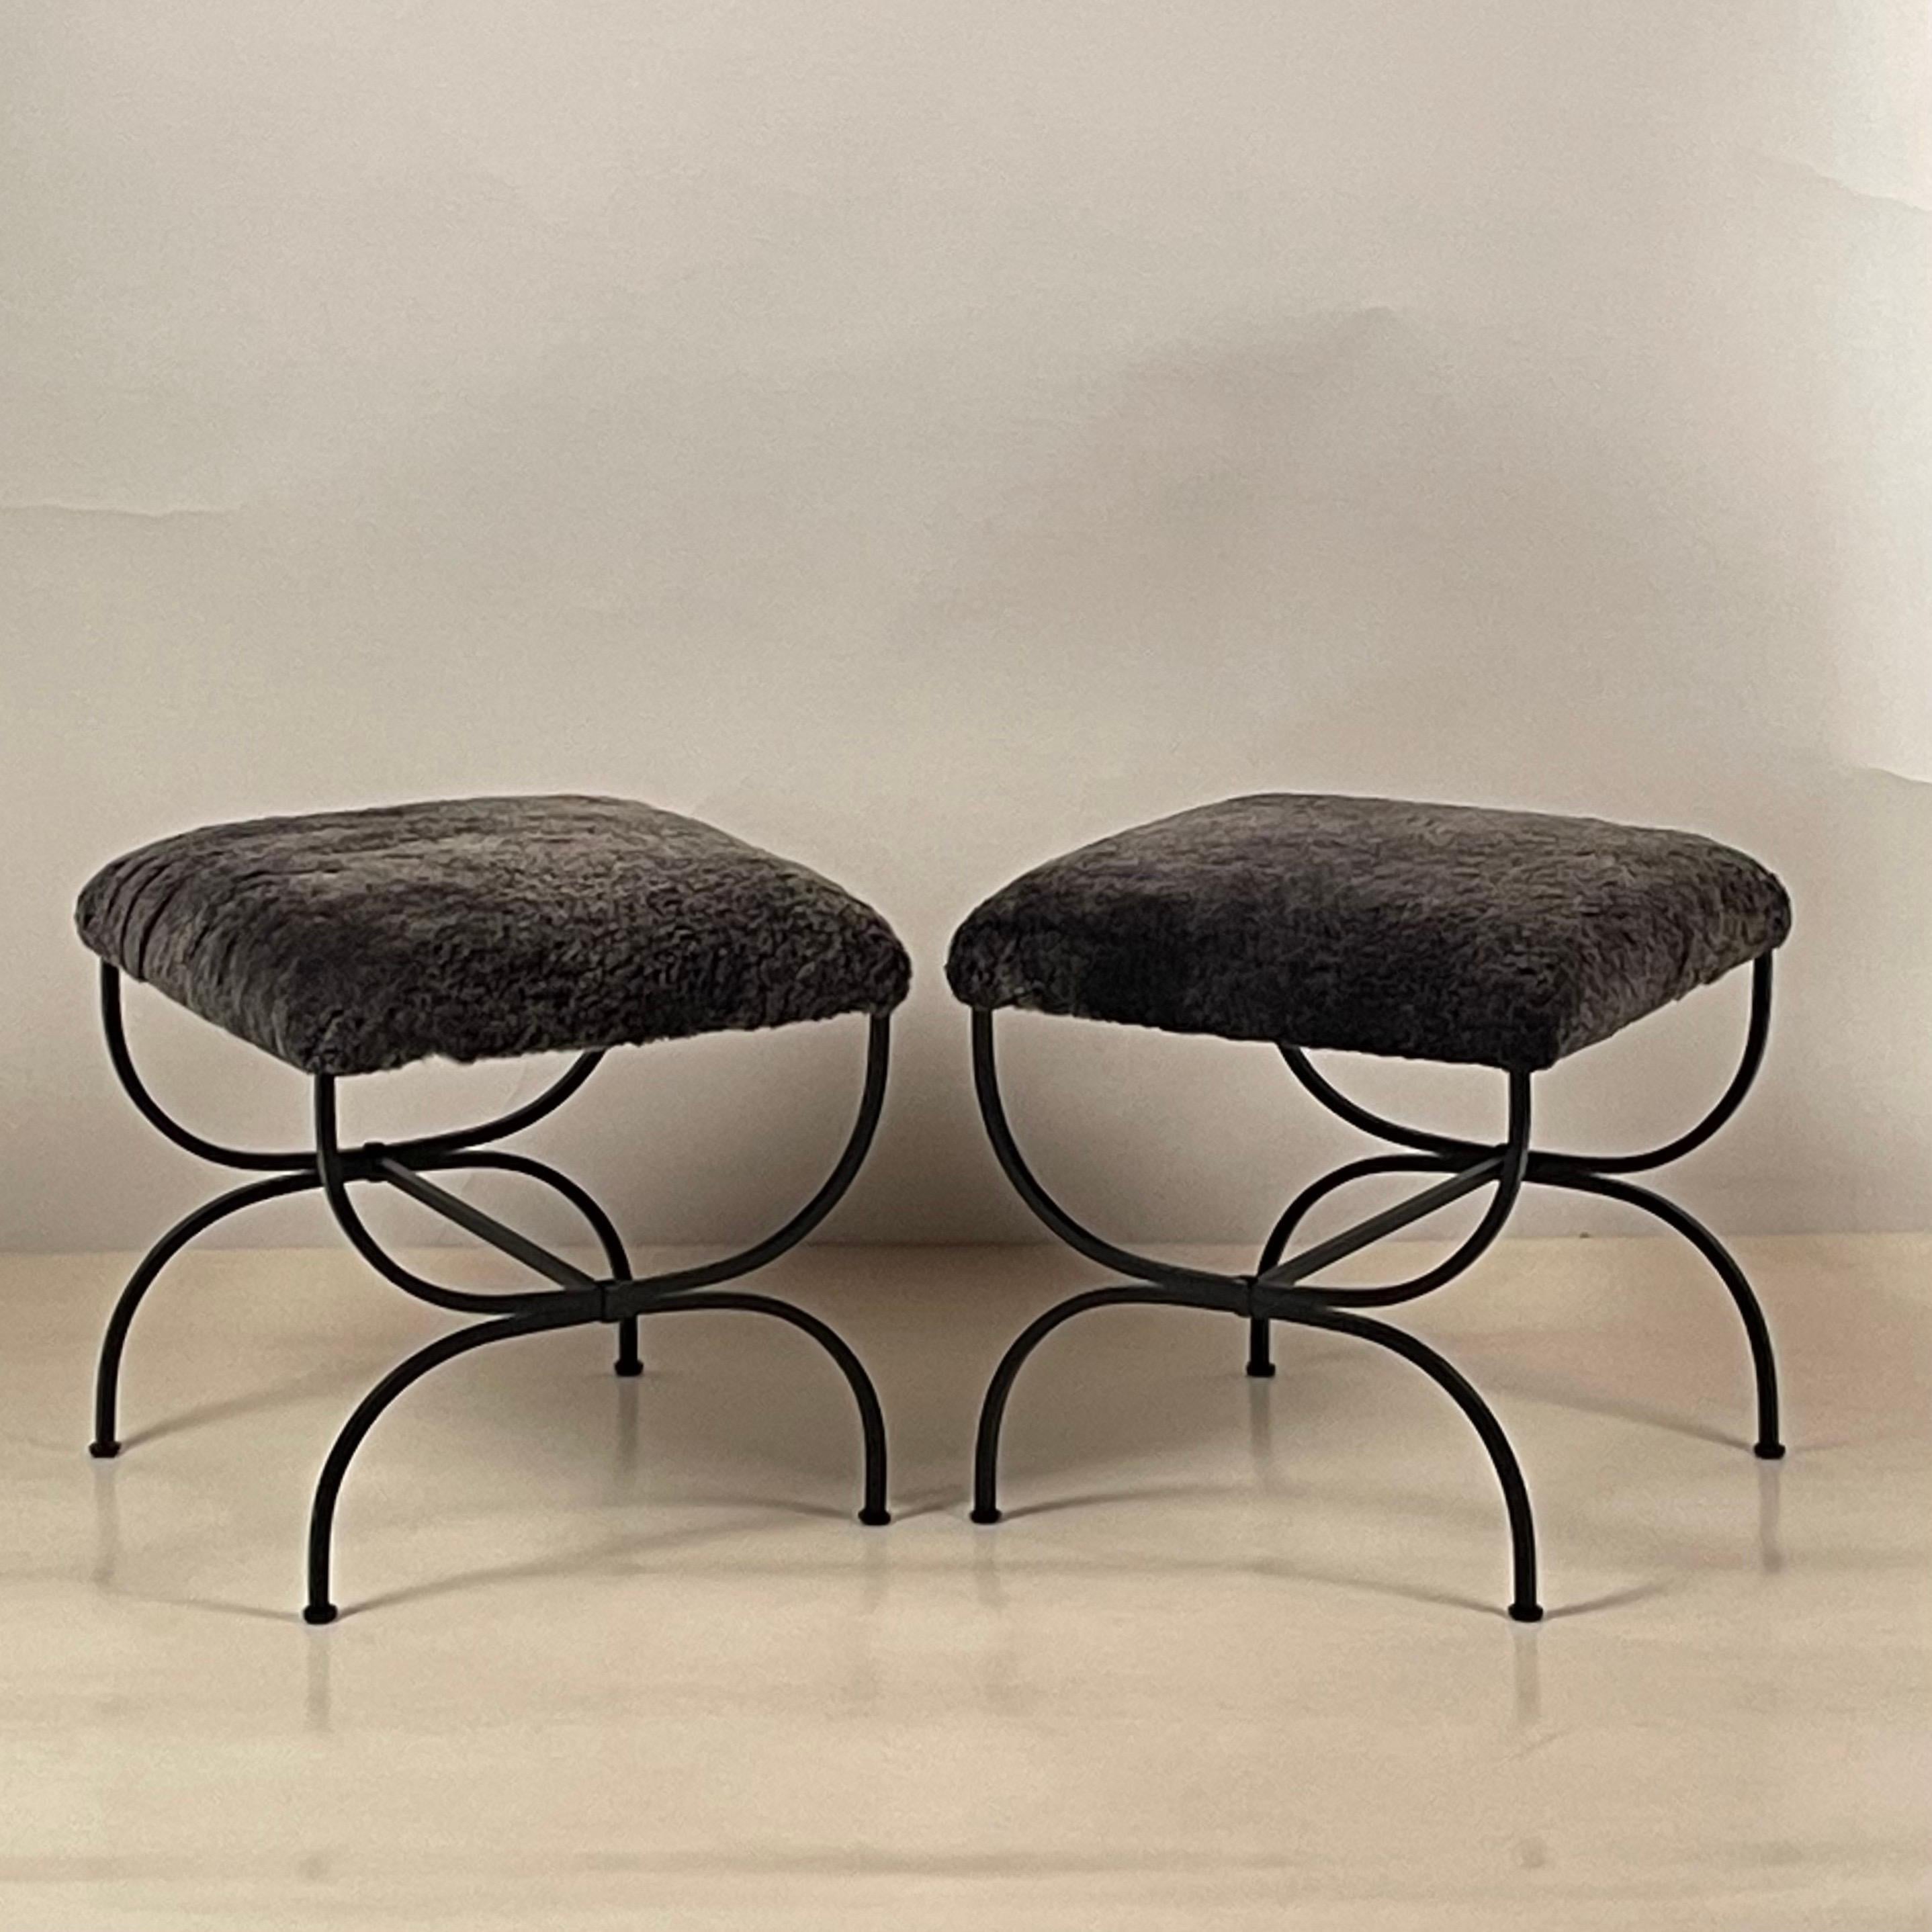 Pair of grey fur 'Strapontin' stools by Design Frères.

Chic and understated.